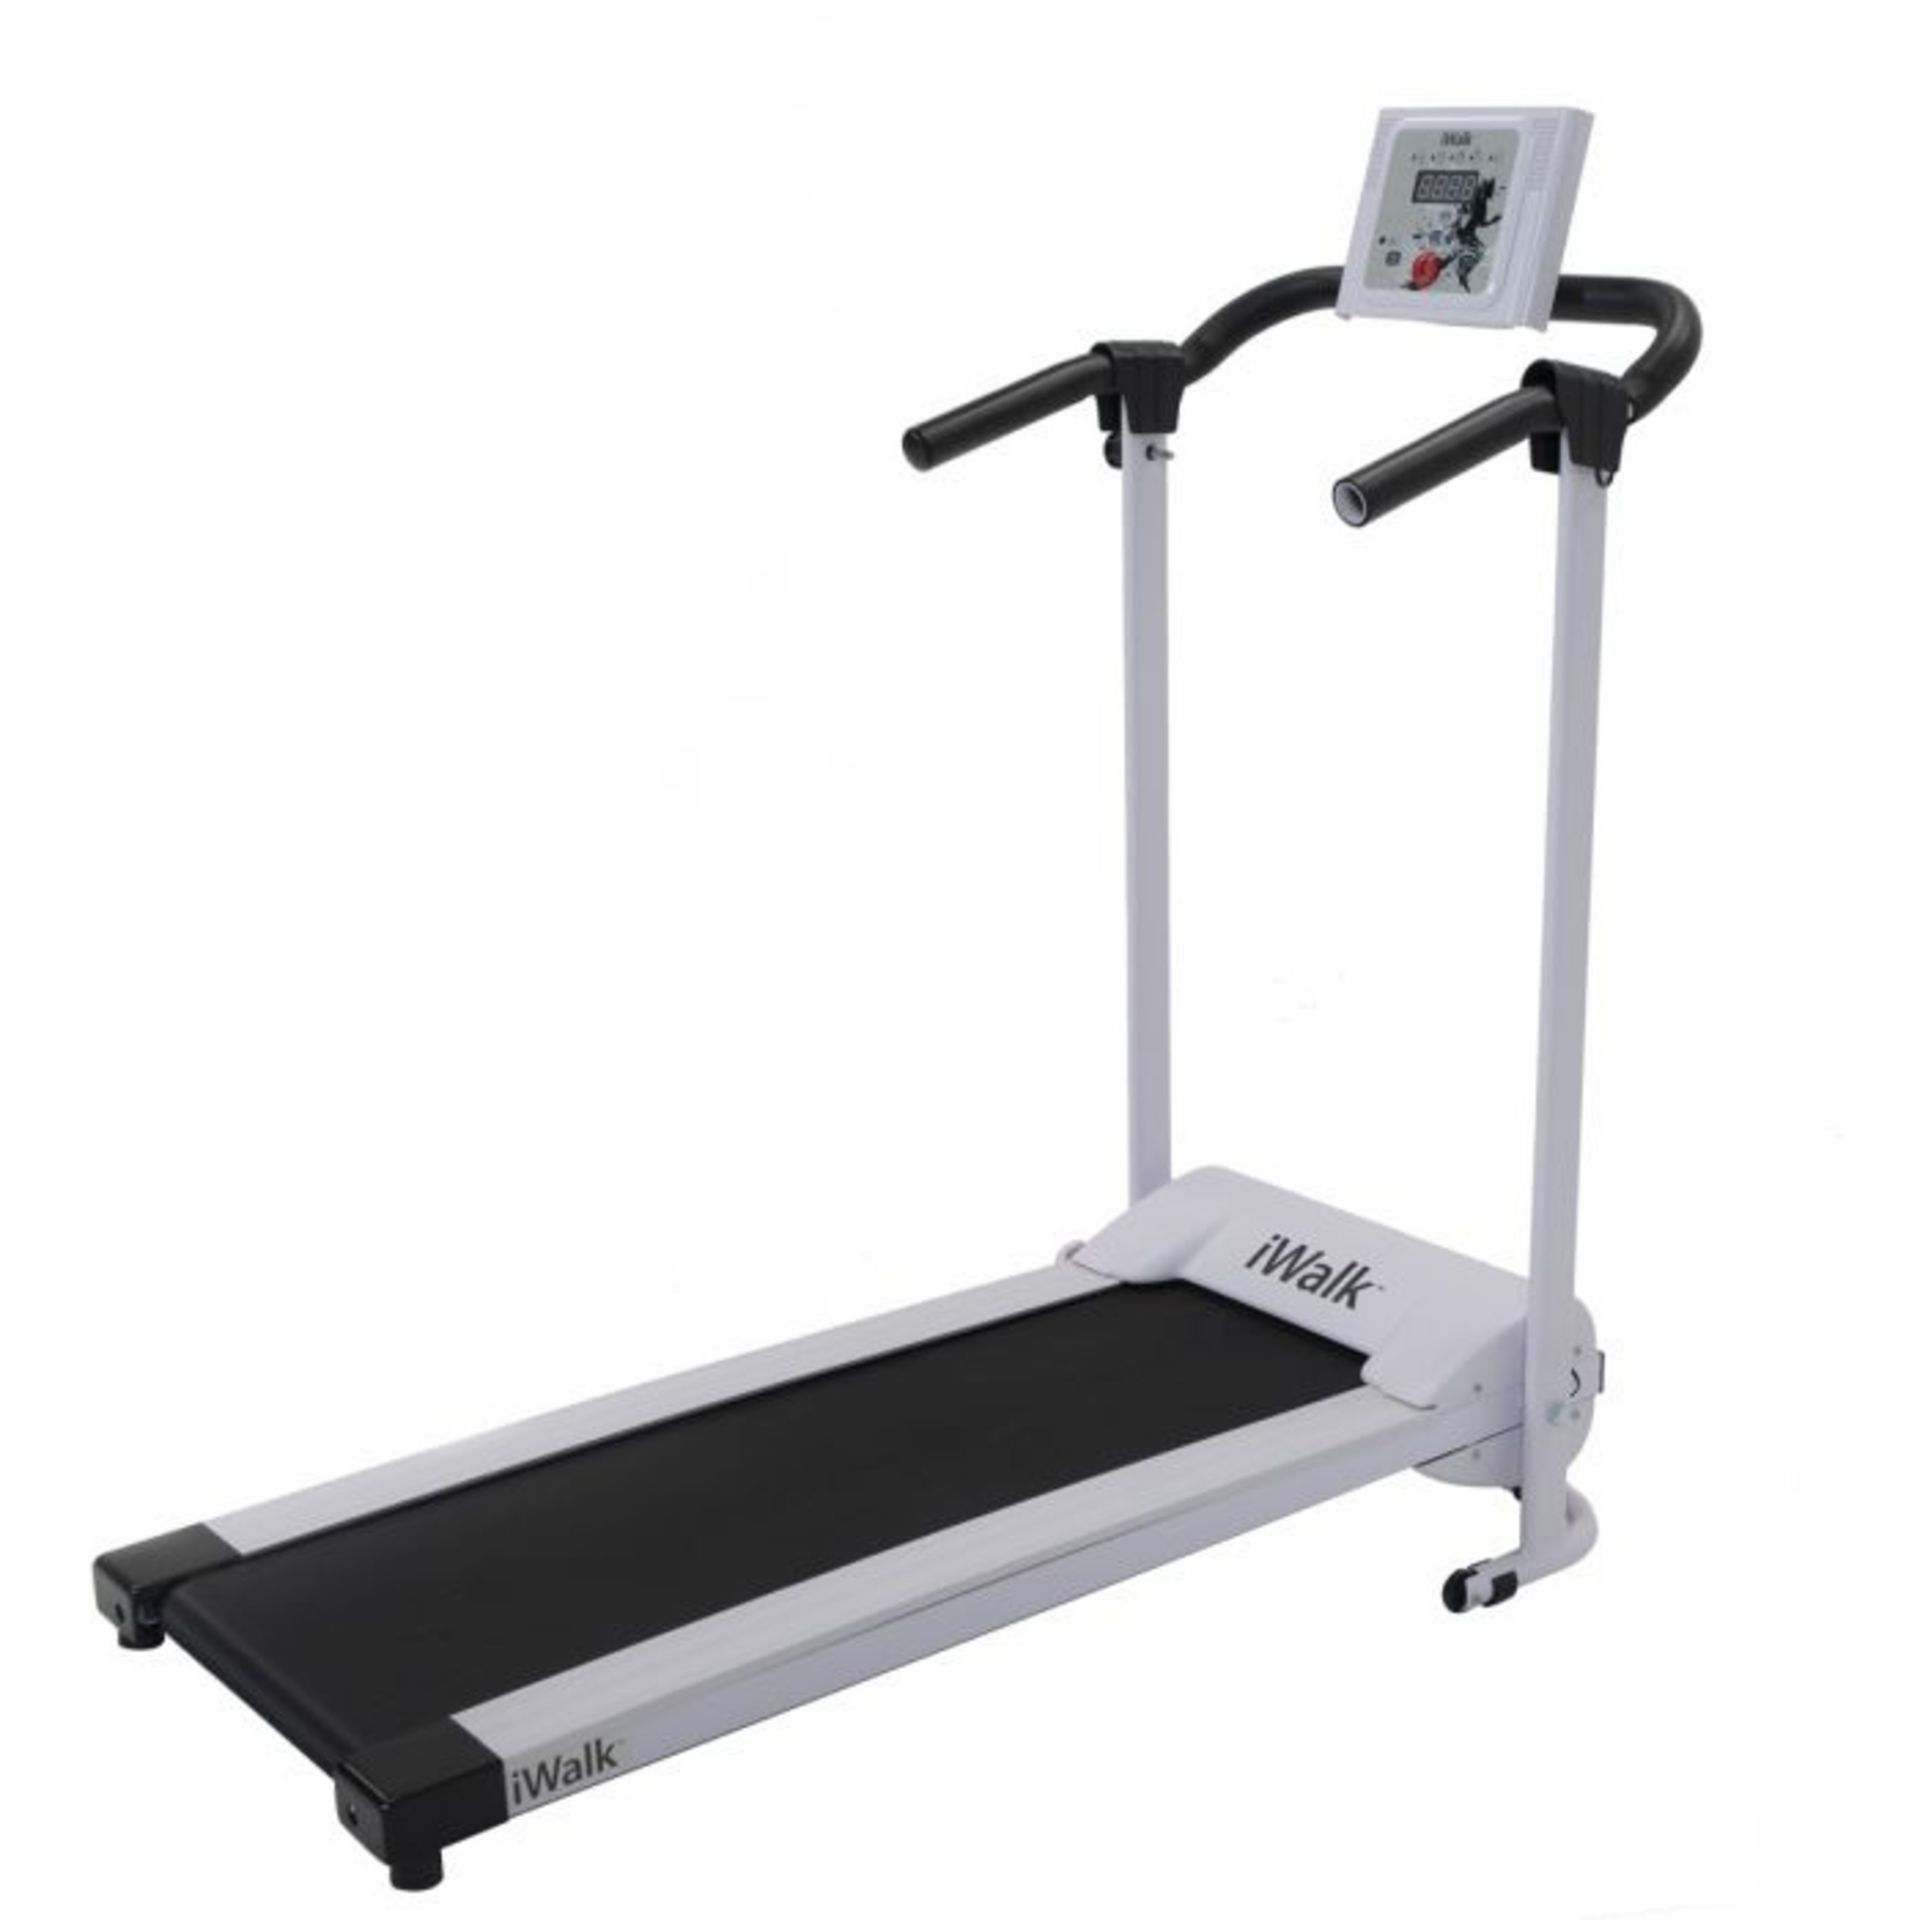 BOXED iWalk - THE COMPACT, POWERFUL HOME FRIENDLY TREADMILL. RRP £349.99. Easy to use - walk and run